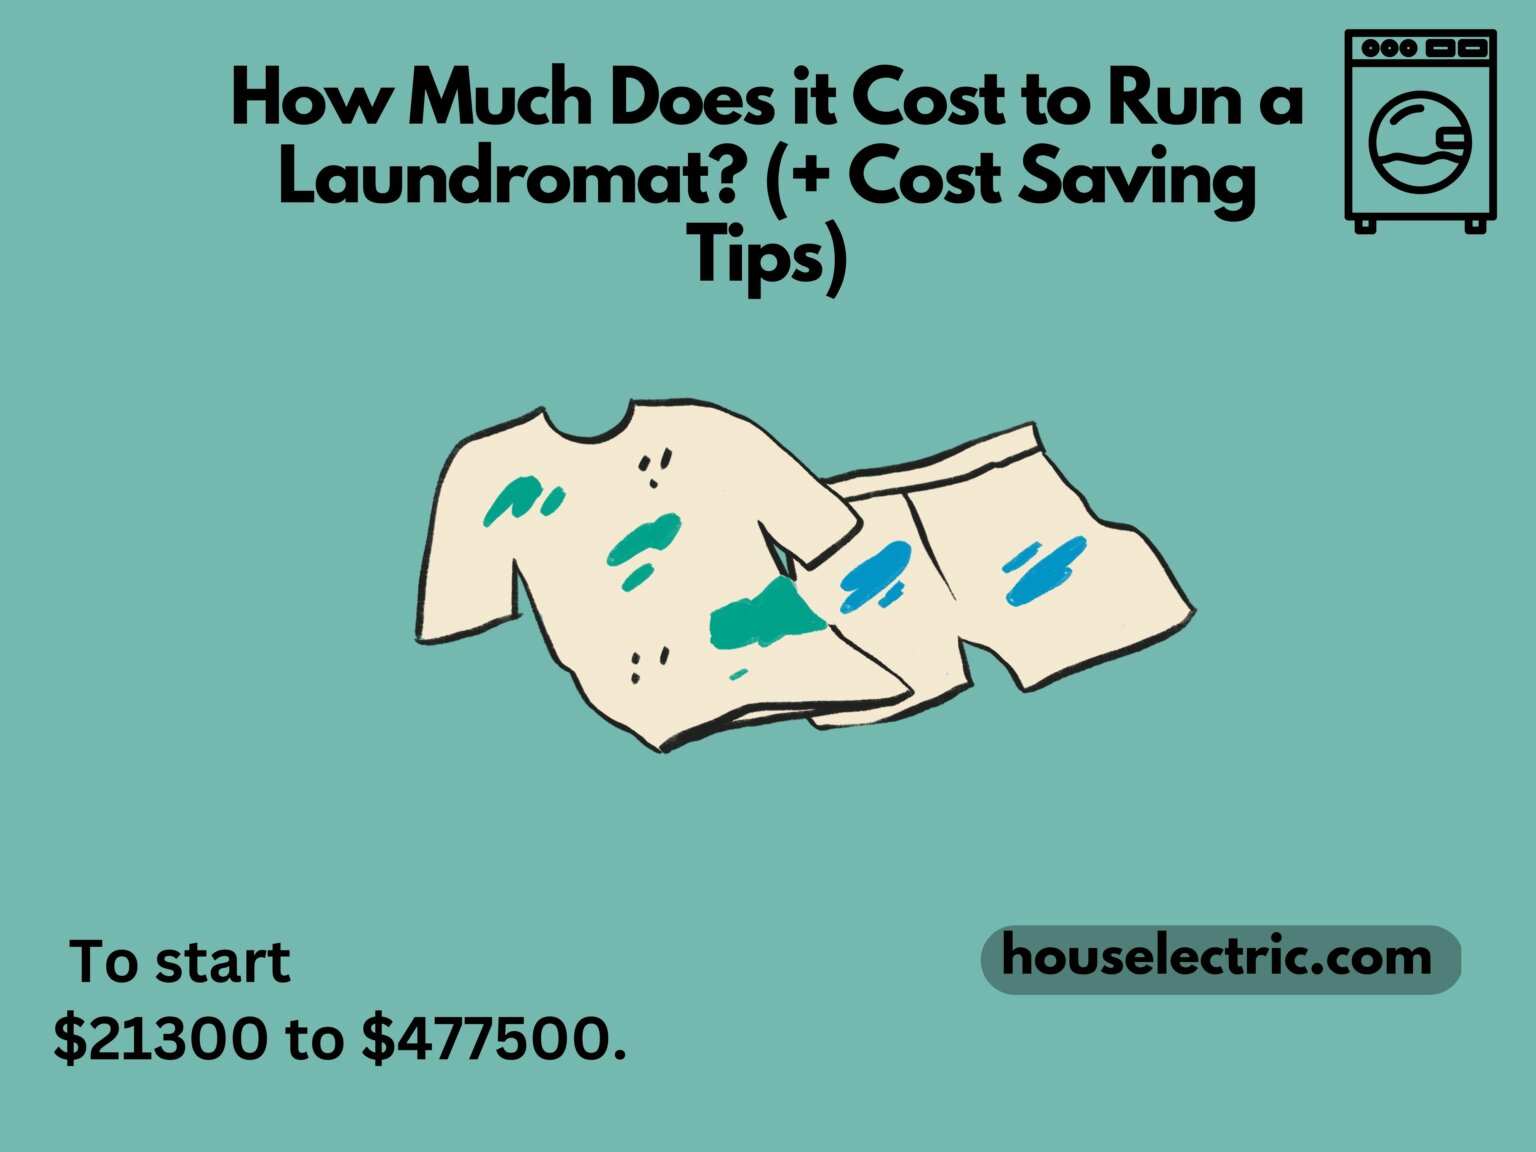 how-much-does-it-cost-to-run-a-laundromat-cost-saving-tips-houselectric